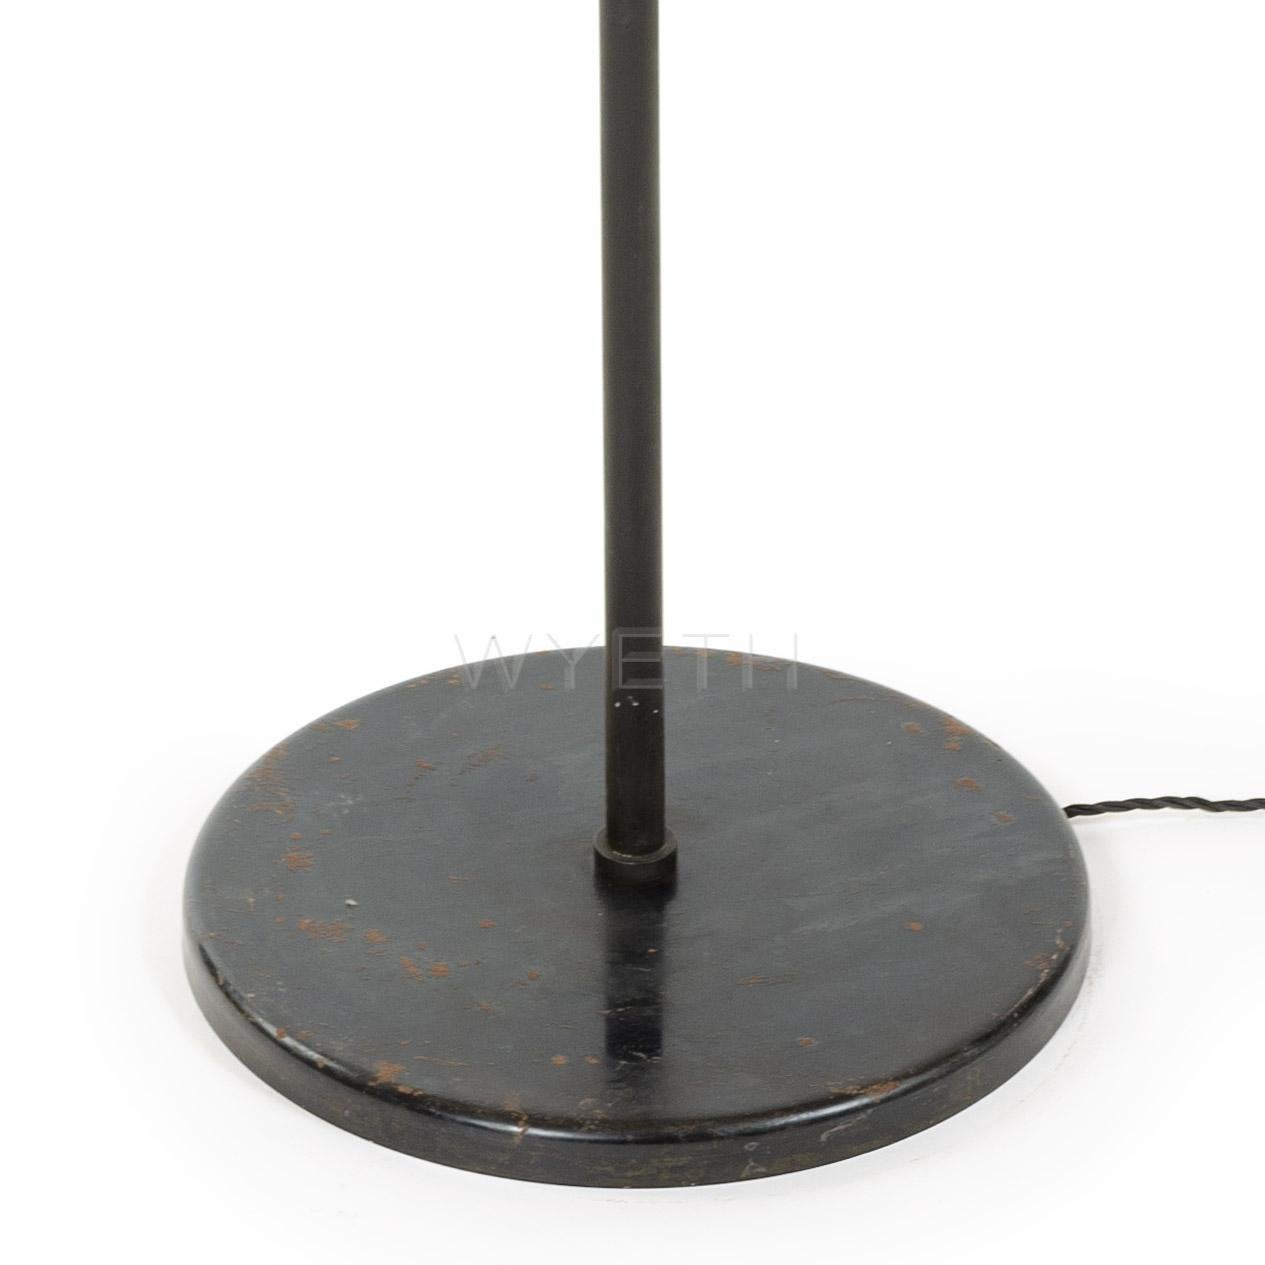 Black enameled steel floor lamp with three brass arms holding a perforated steel reflector and shade.